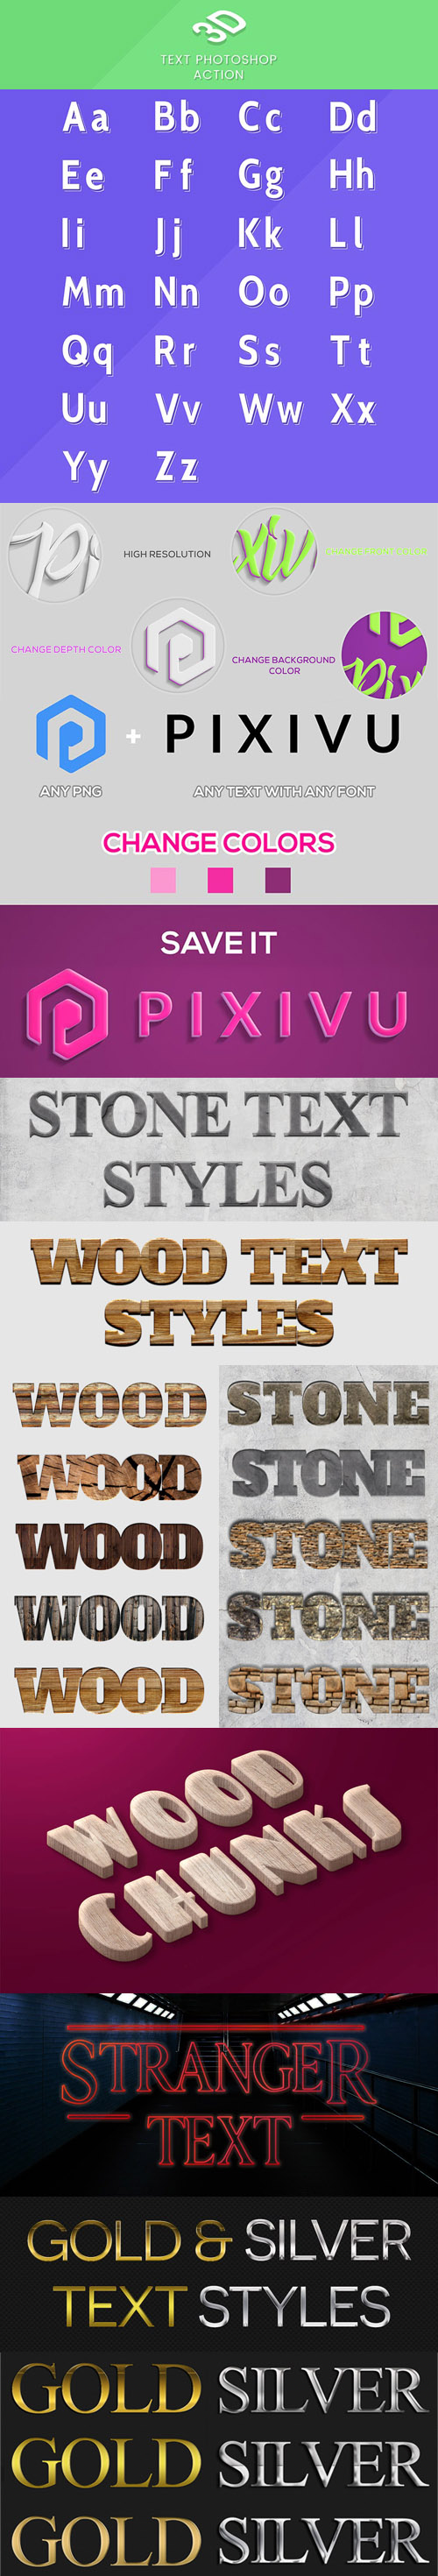 7 Text Effects & Styles Collection for Photoshop